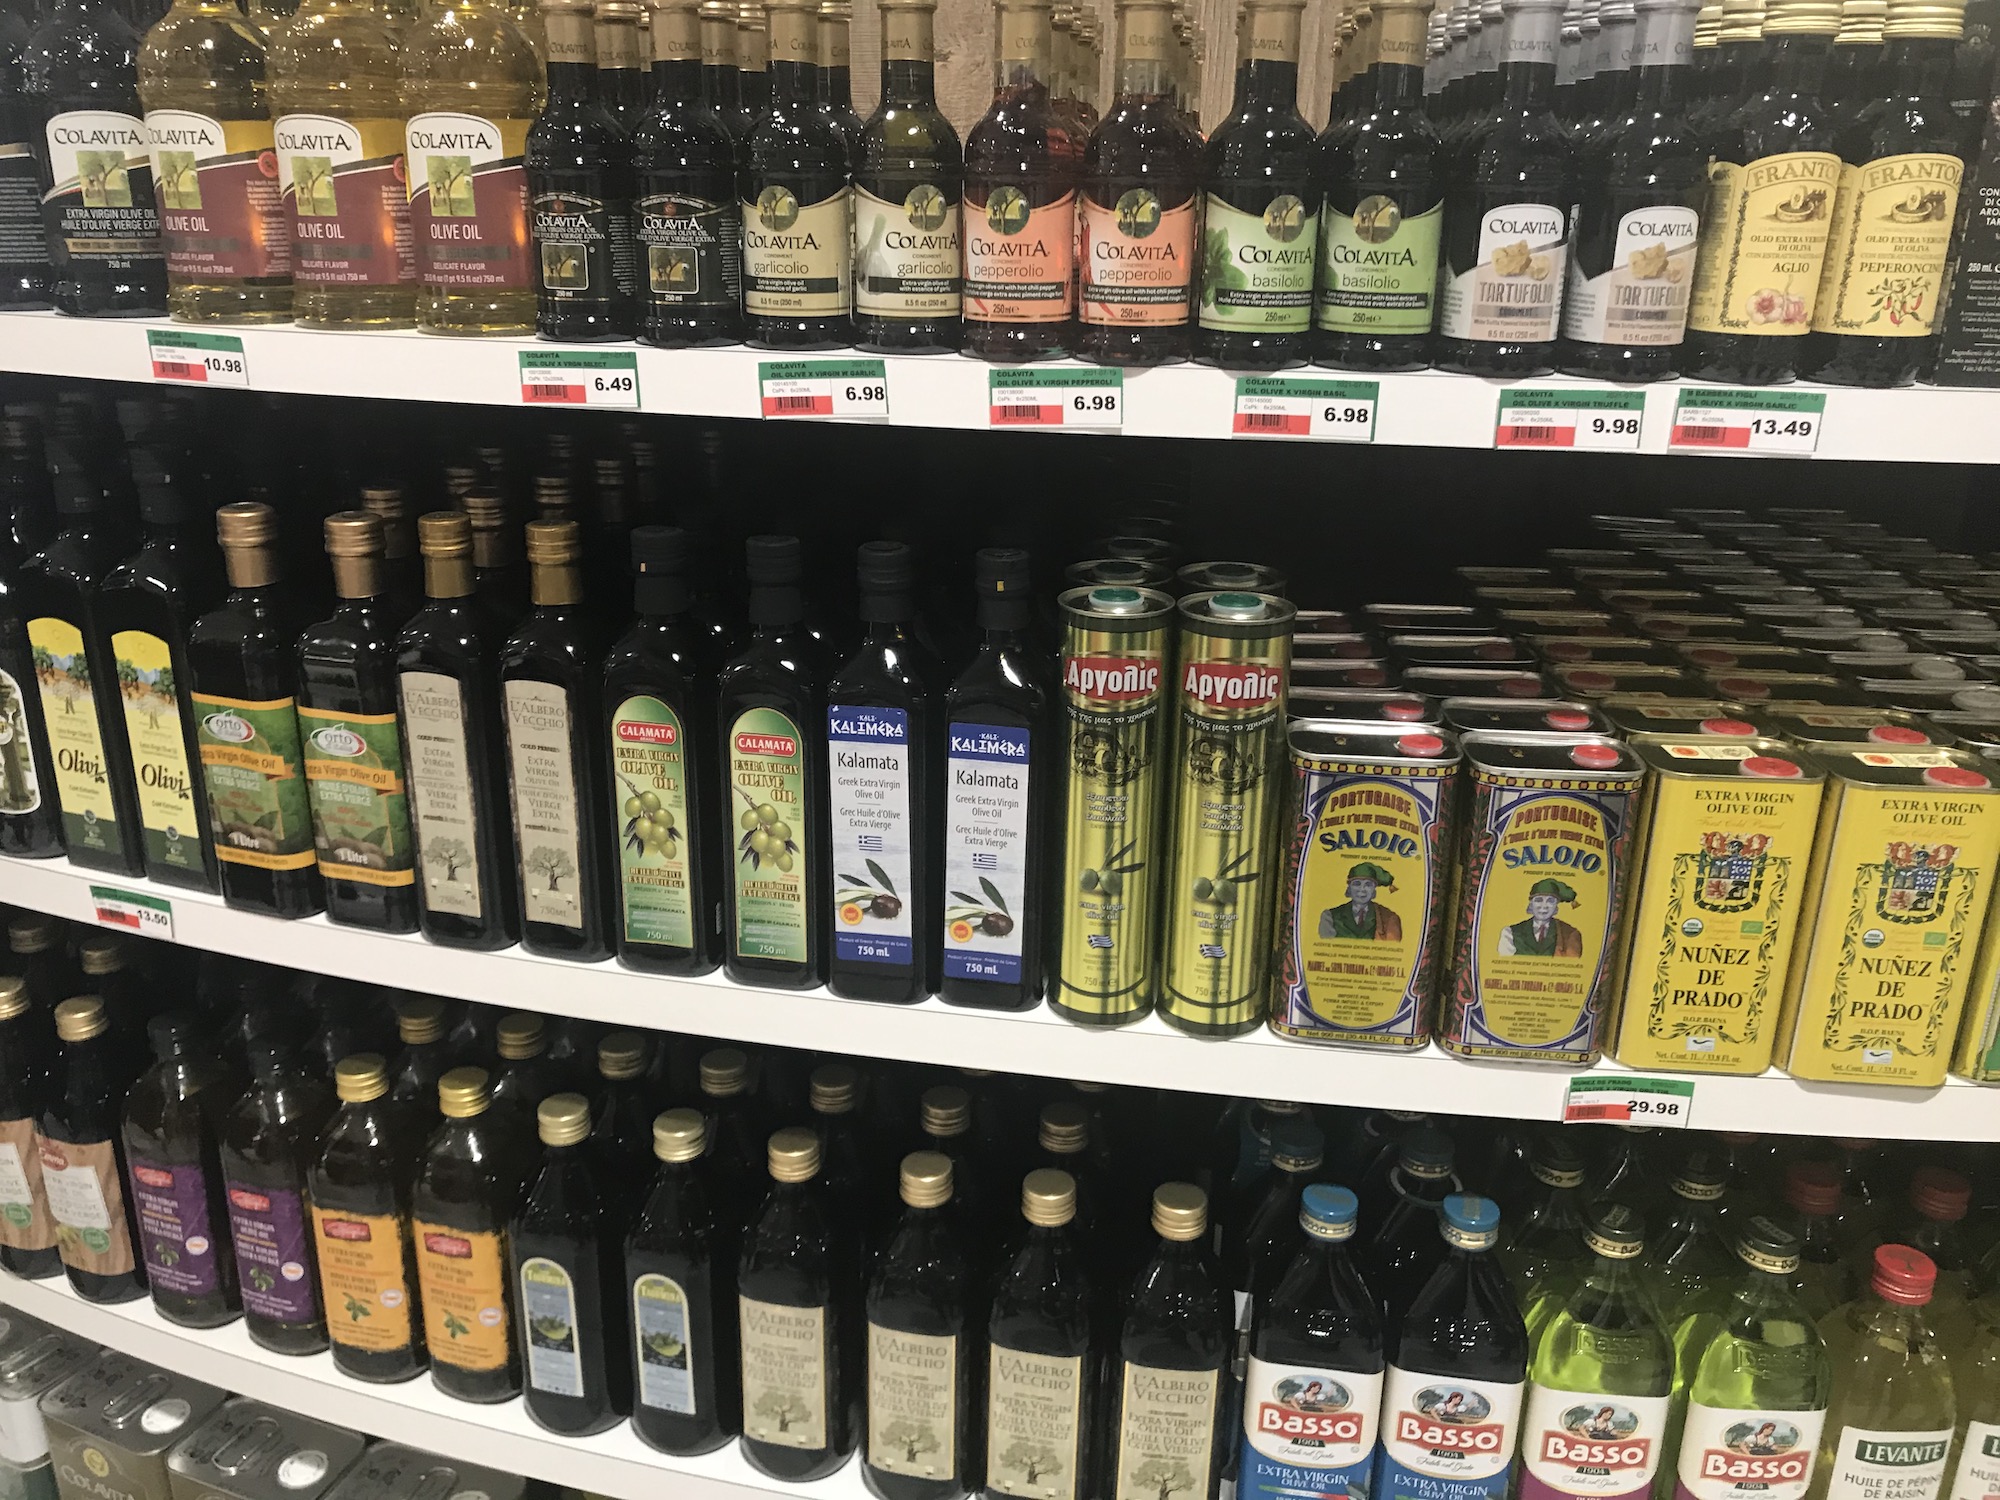 The wall of olive oil